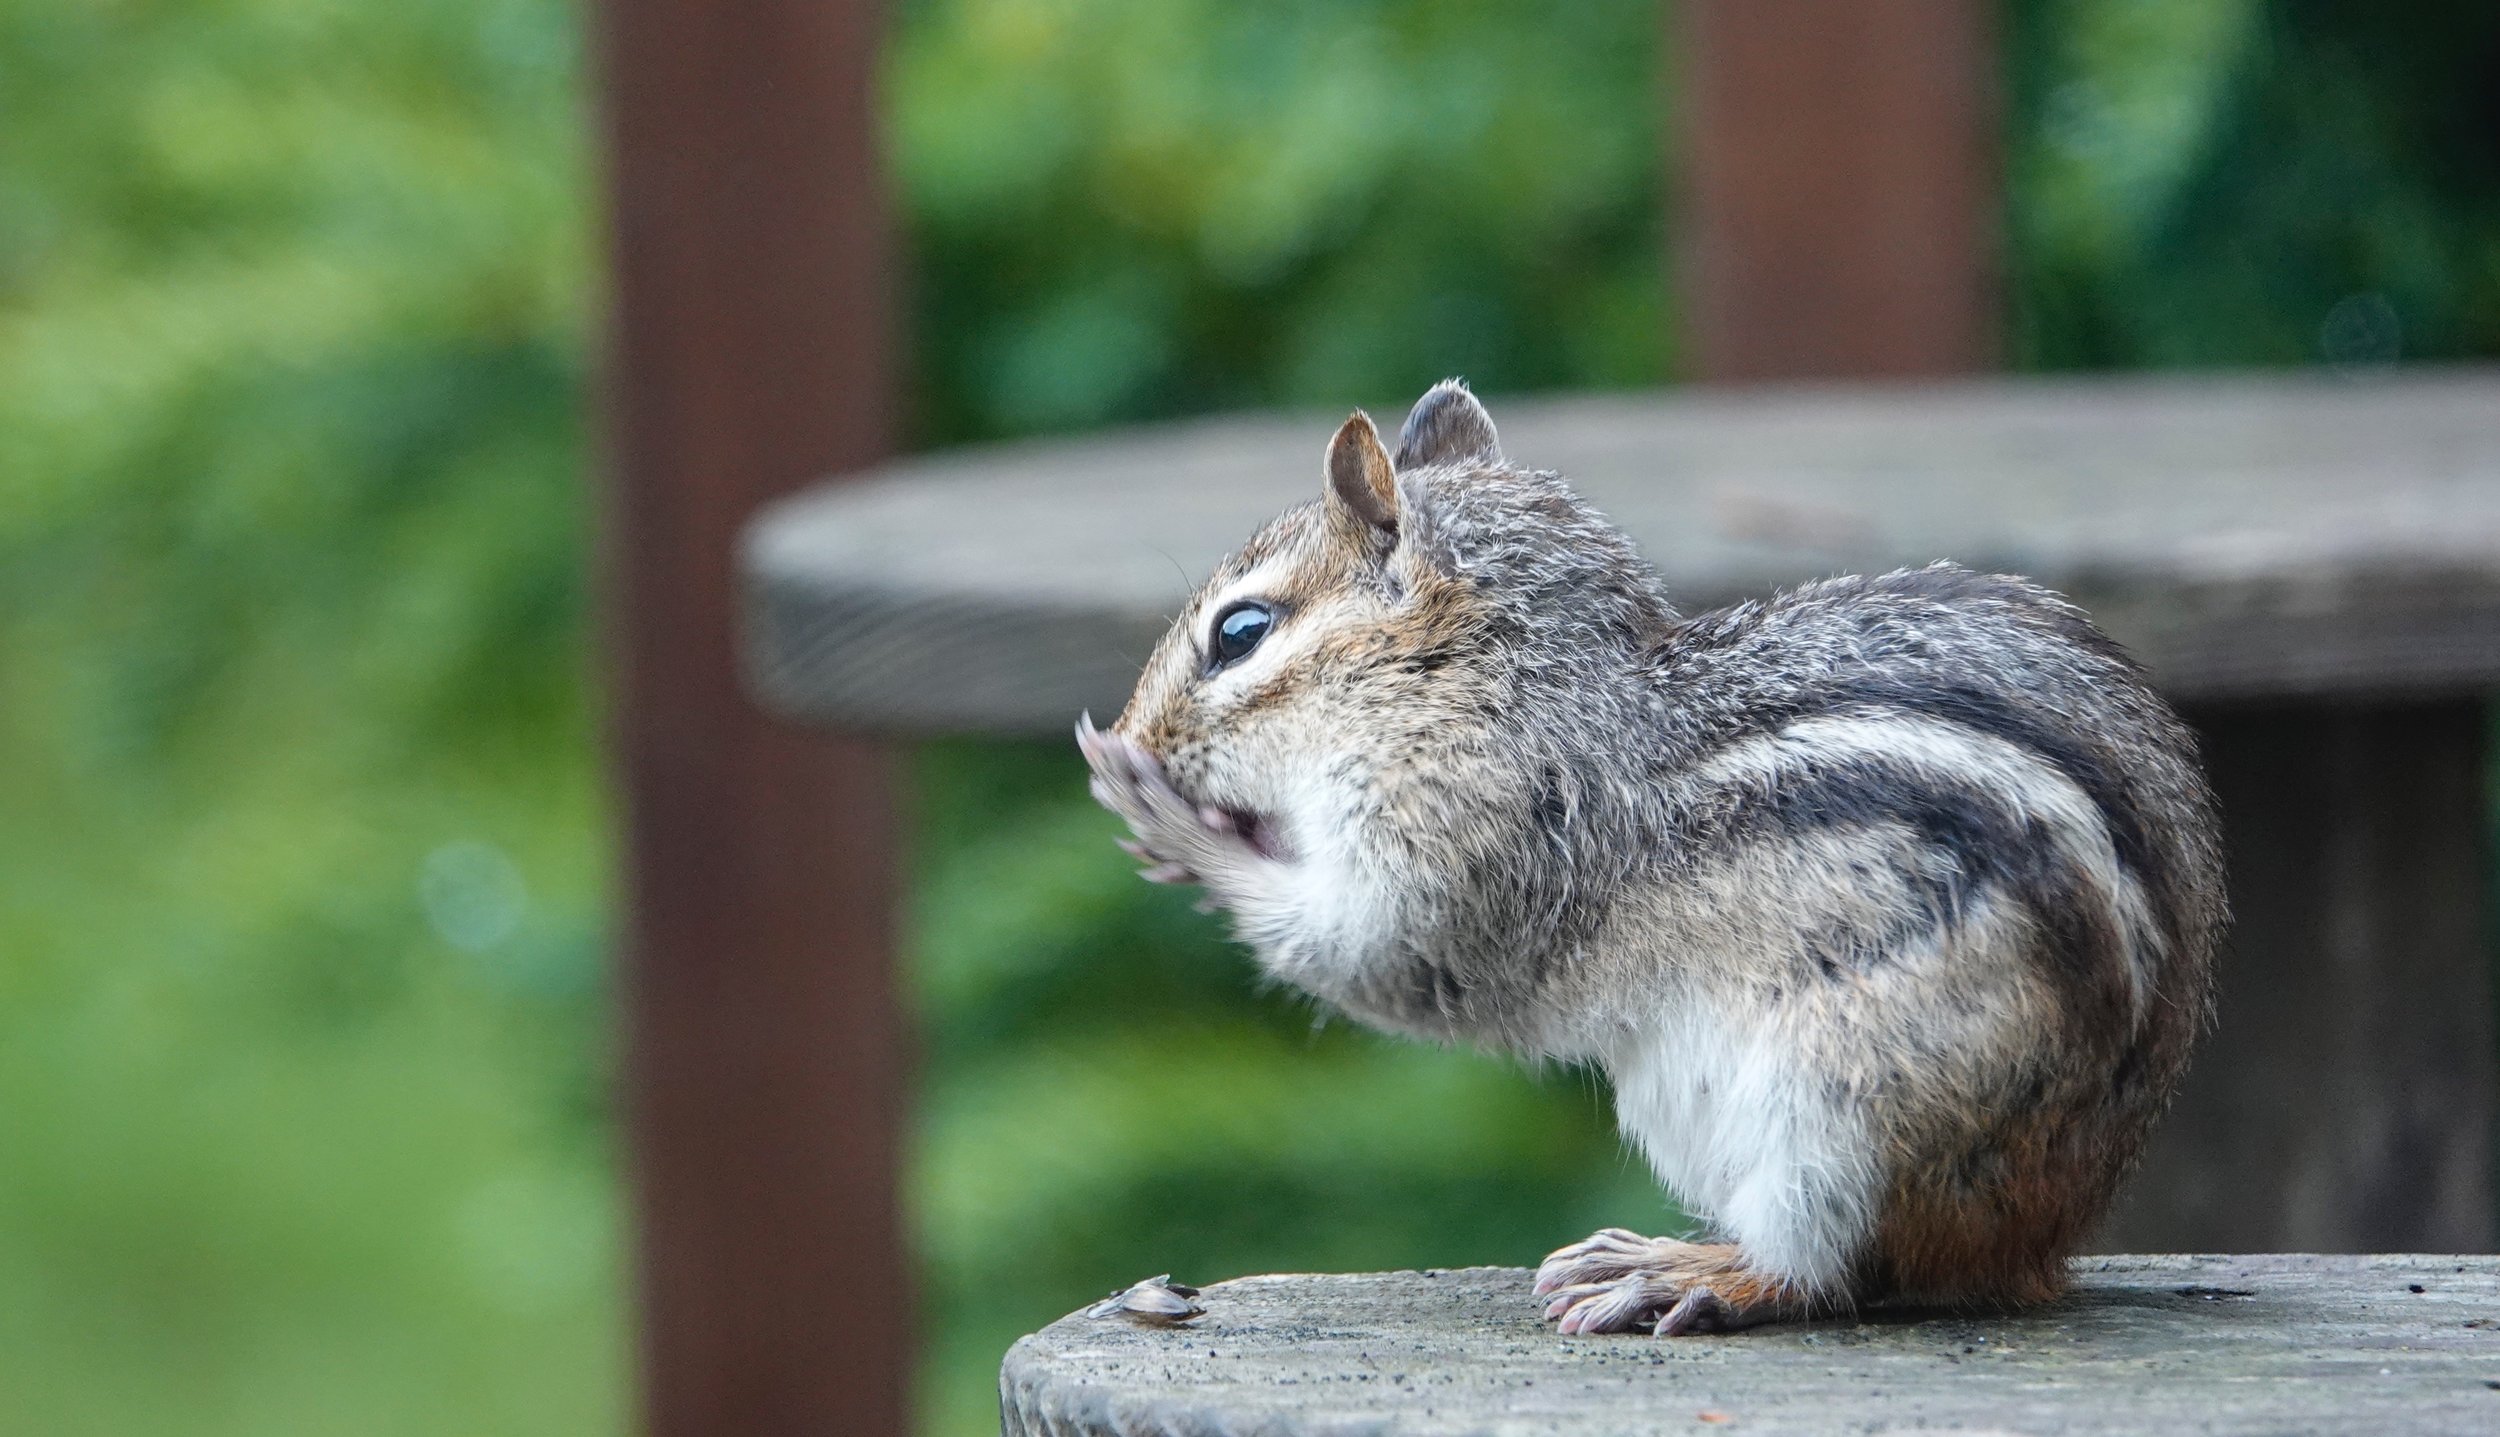 The Chipmunk Was Appalled To See What The Rabbit Was Eating In The